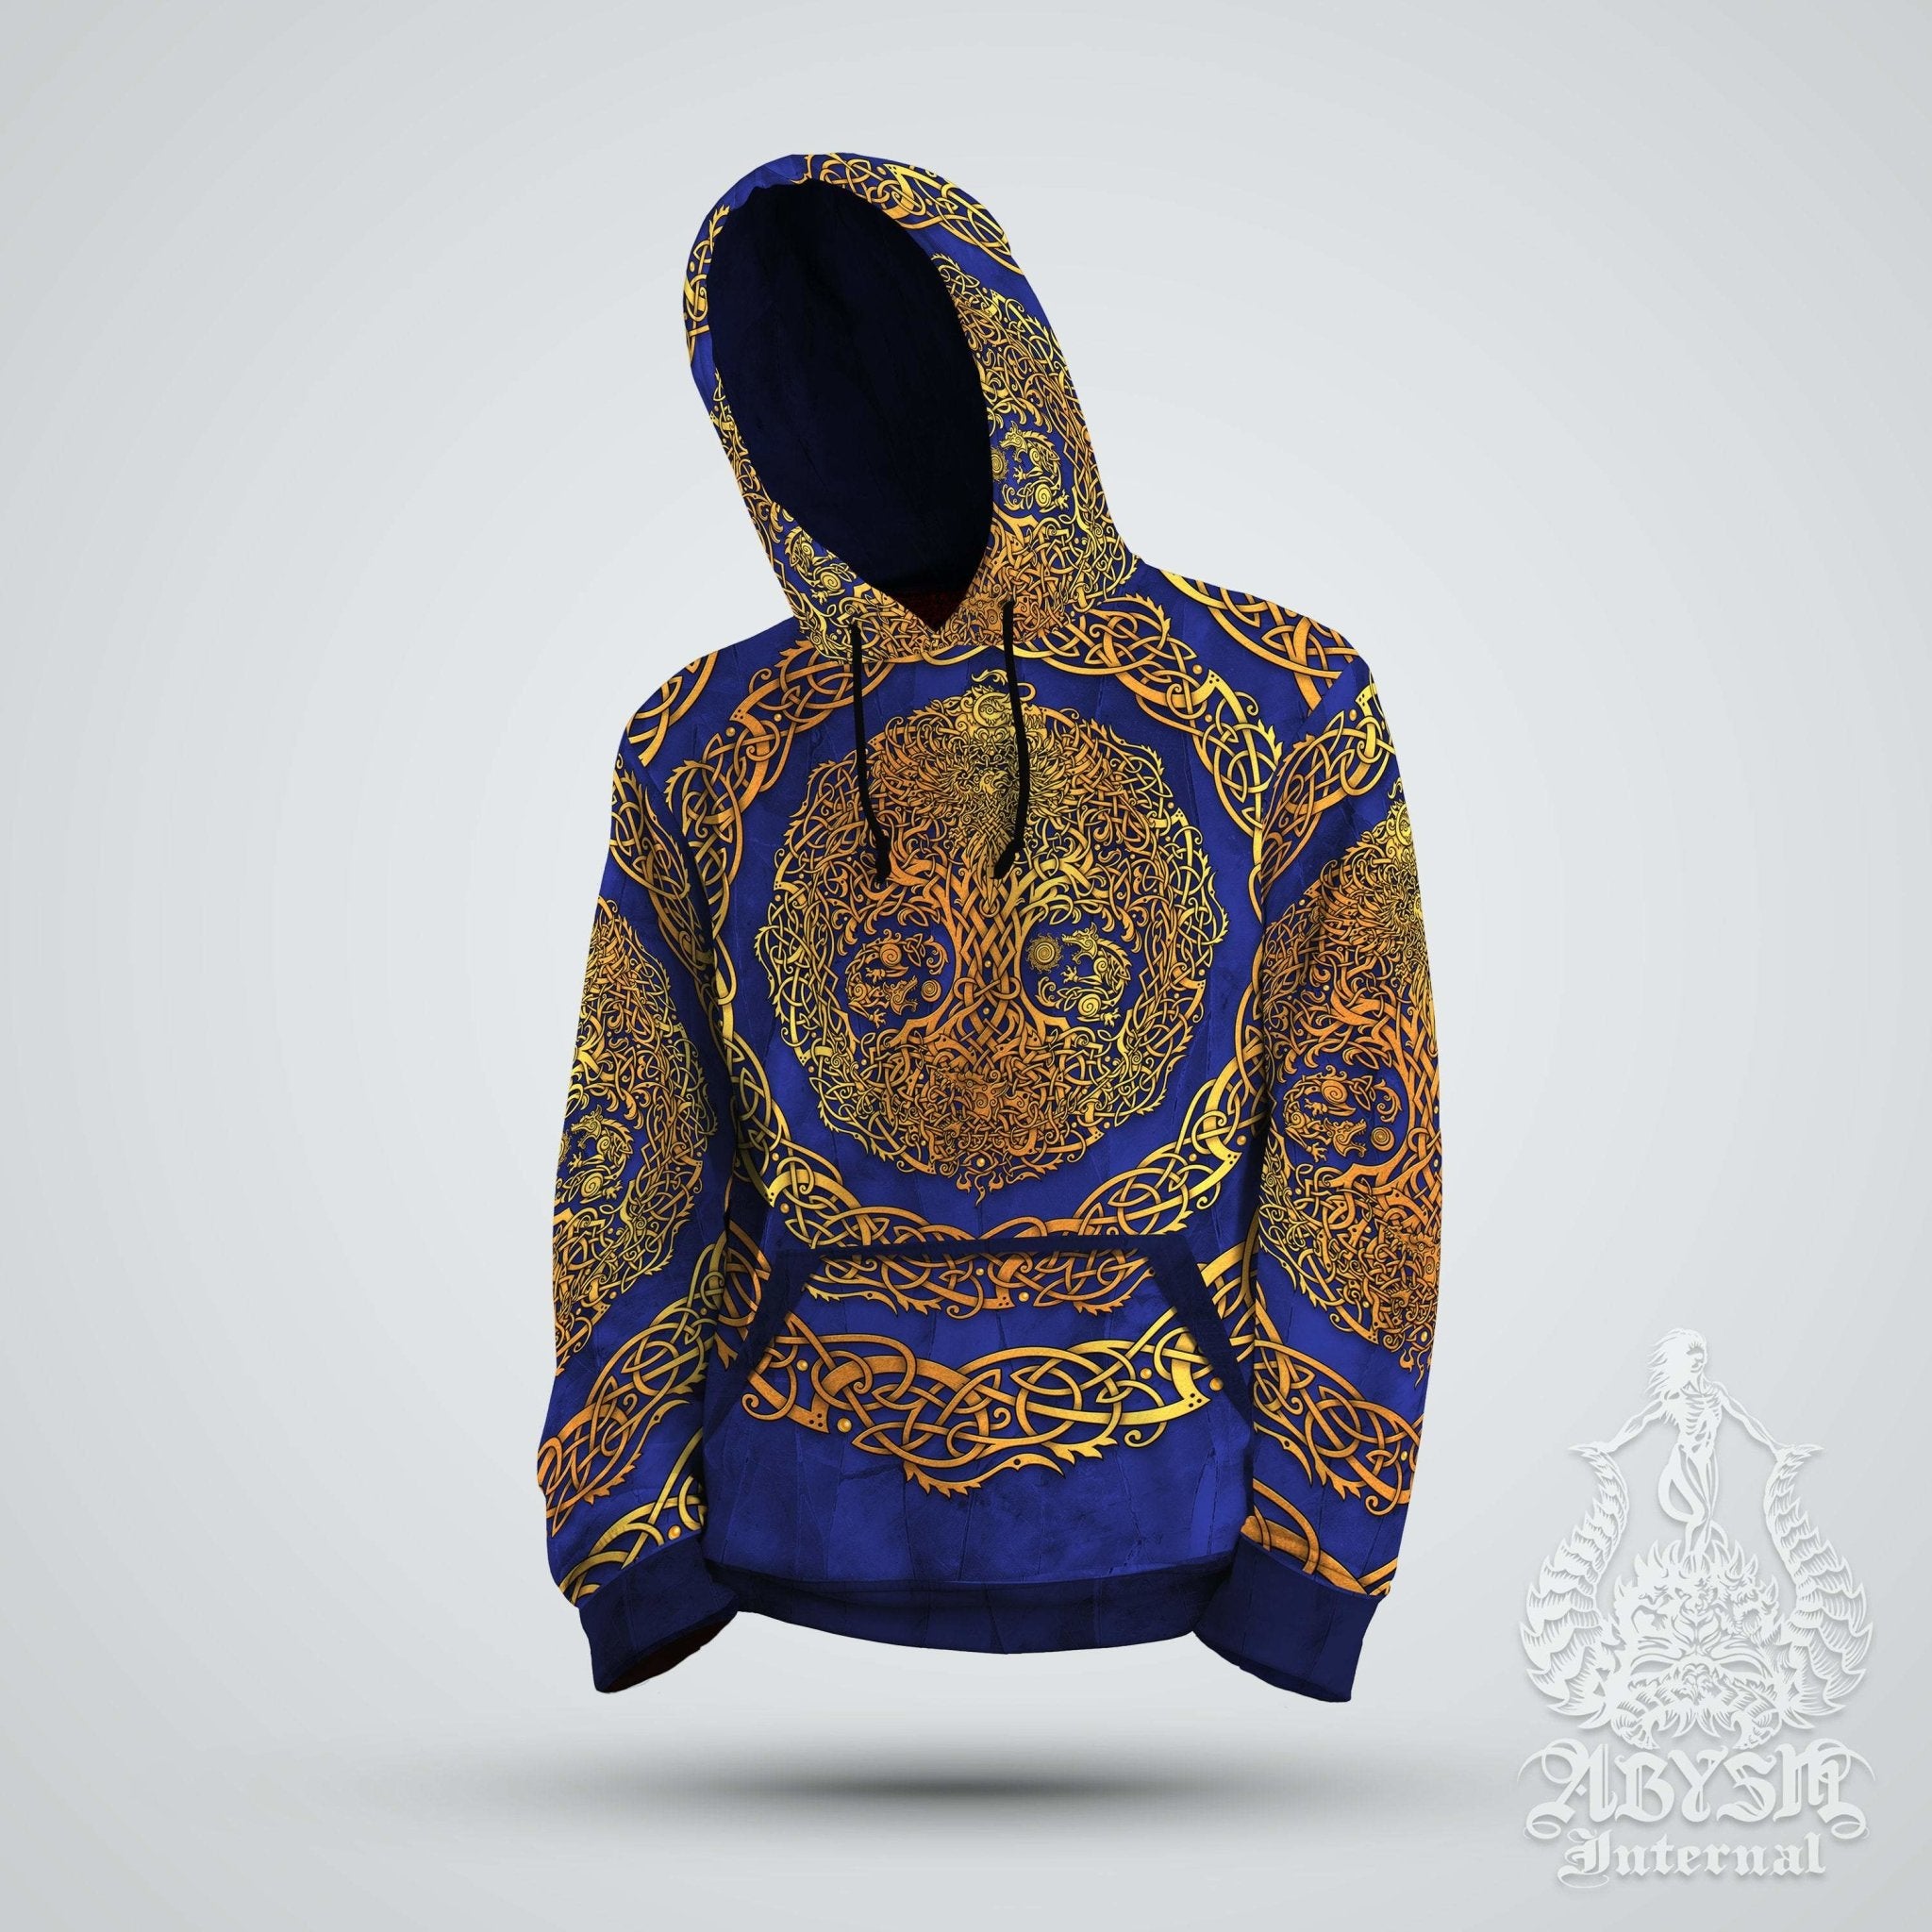 Yggdrasil Hoodie, Viking Sweater, Norse Street Outfit, Tree of Life Streetwear, Alternative Clothing, Unisex - Gold Blue - Abysm Internal